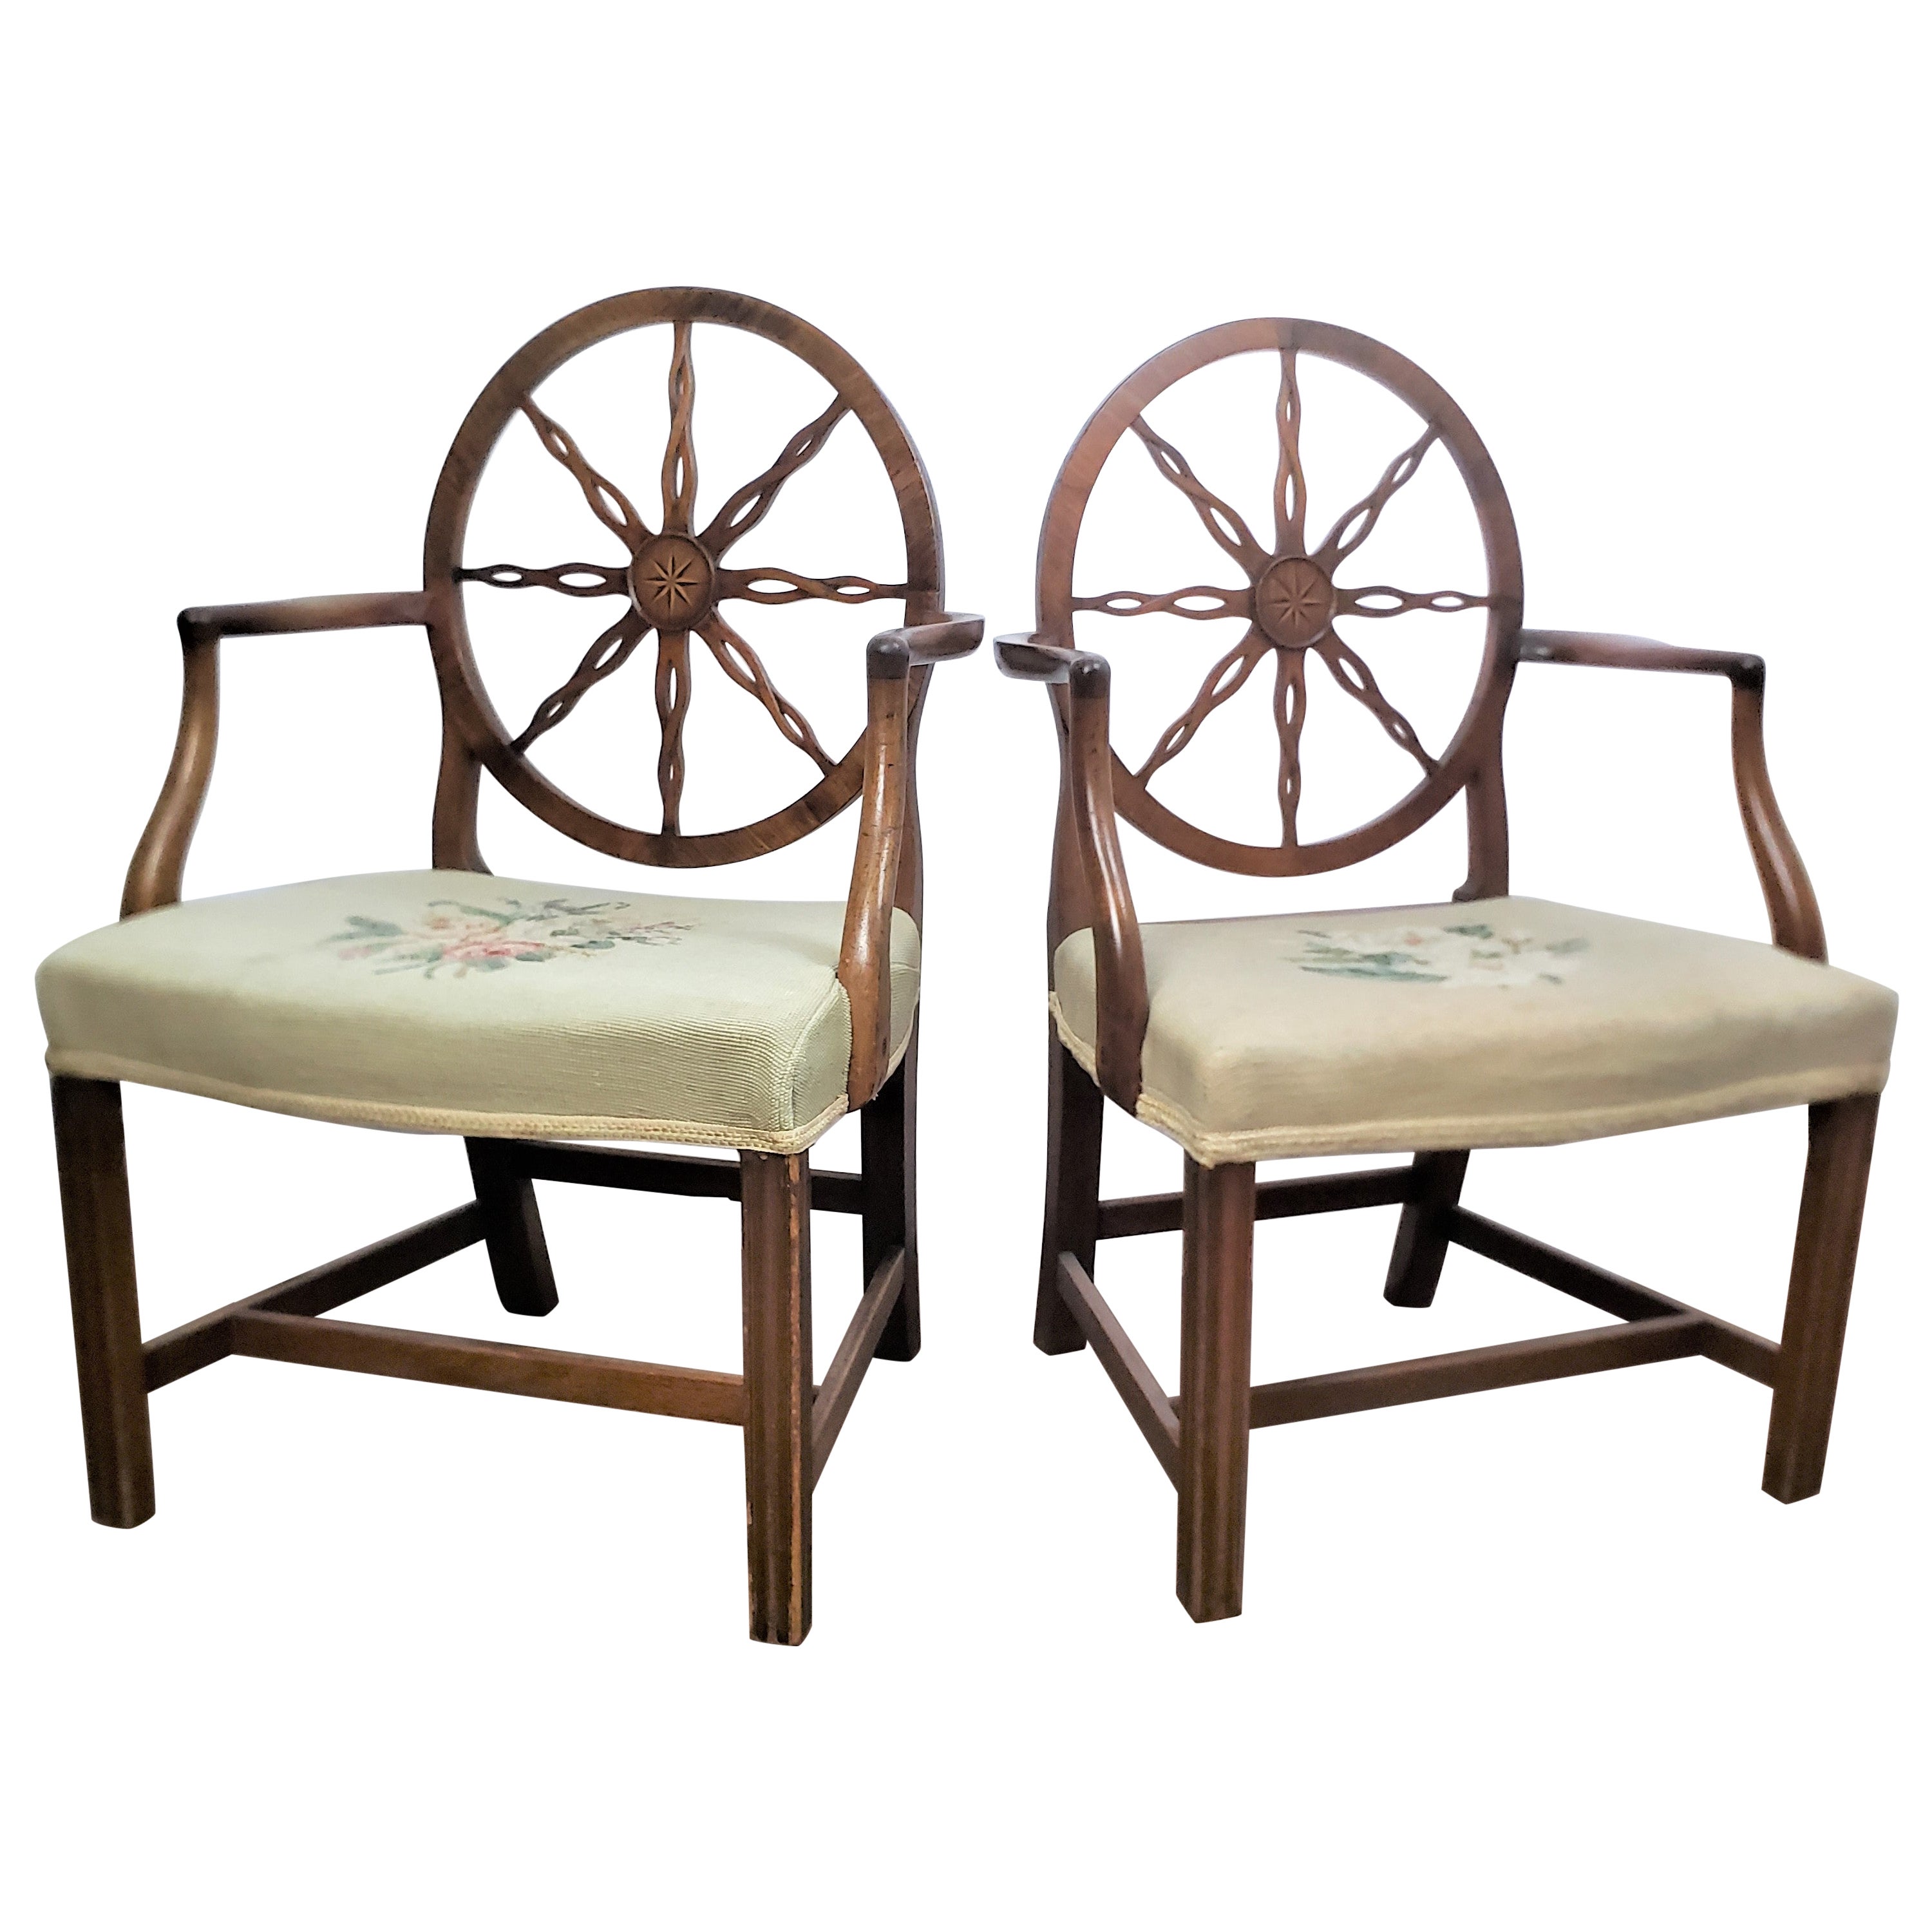 Pair of Antique King George III Period Wheelback Armchair or Side Chair Frames For Sale